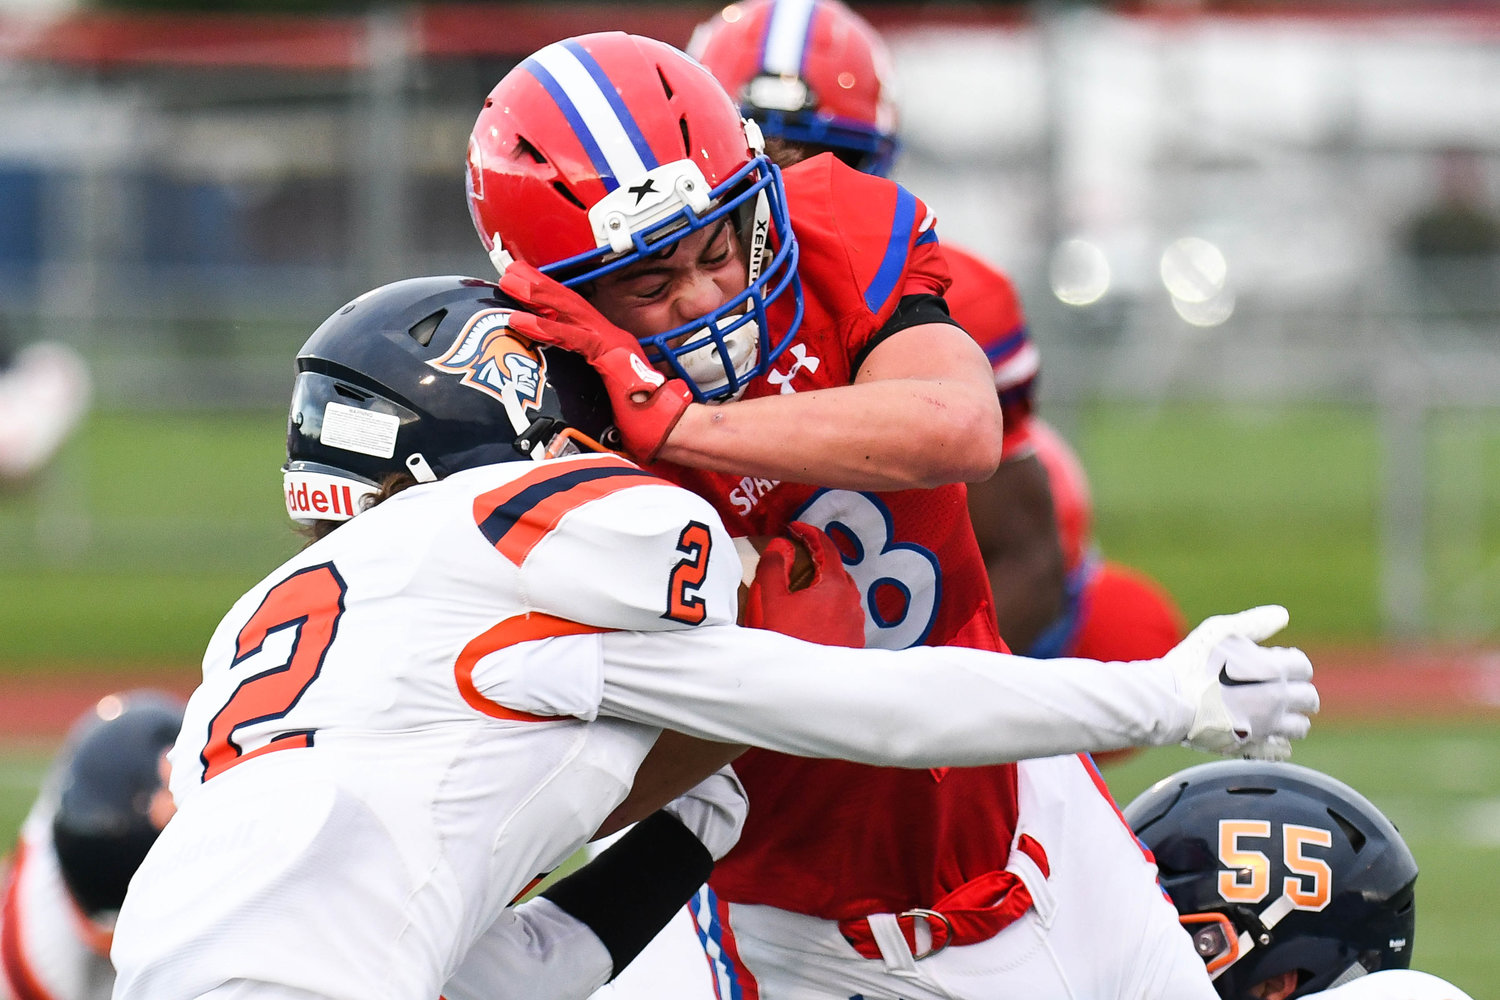 New Hartford senior Alex Collver (8) collides with East Syracuse-Minoa's Damon Jones (2) Friday at Don Edick Field. Collver had more than 200 yards rushing and two touchdowns for New Hartford.